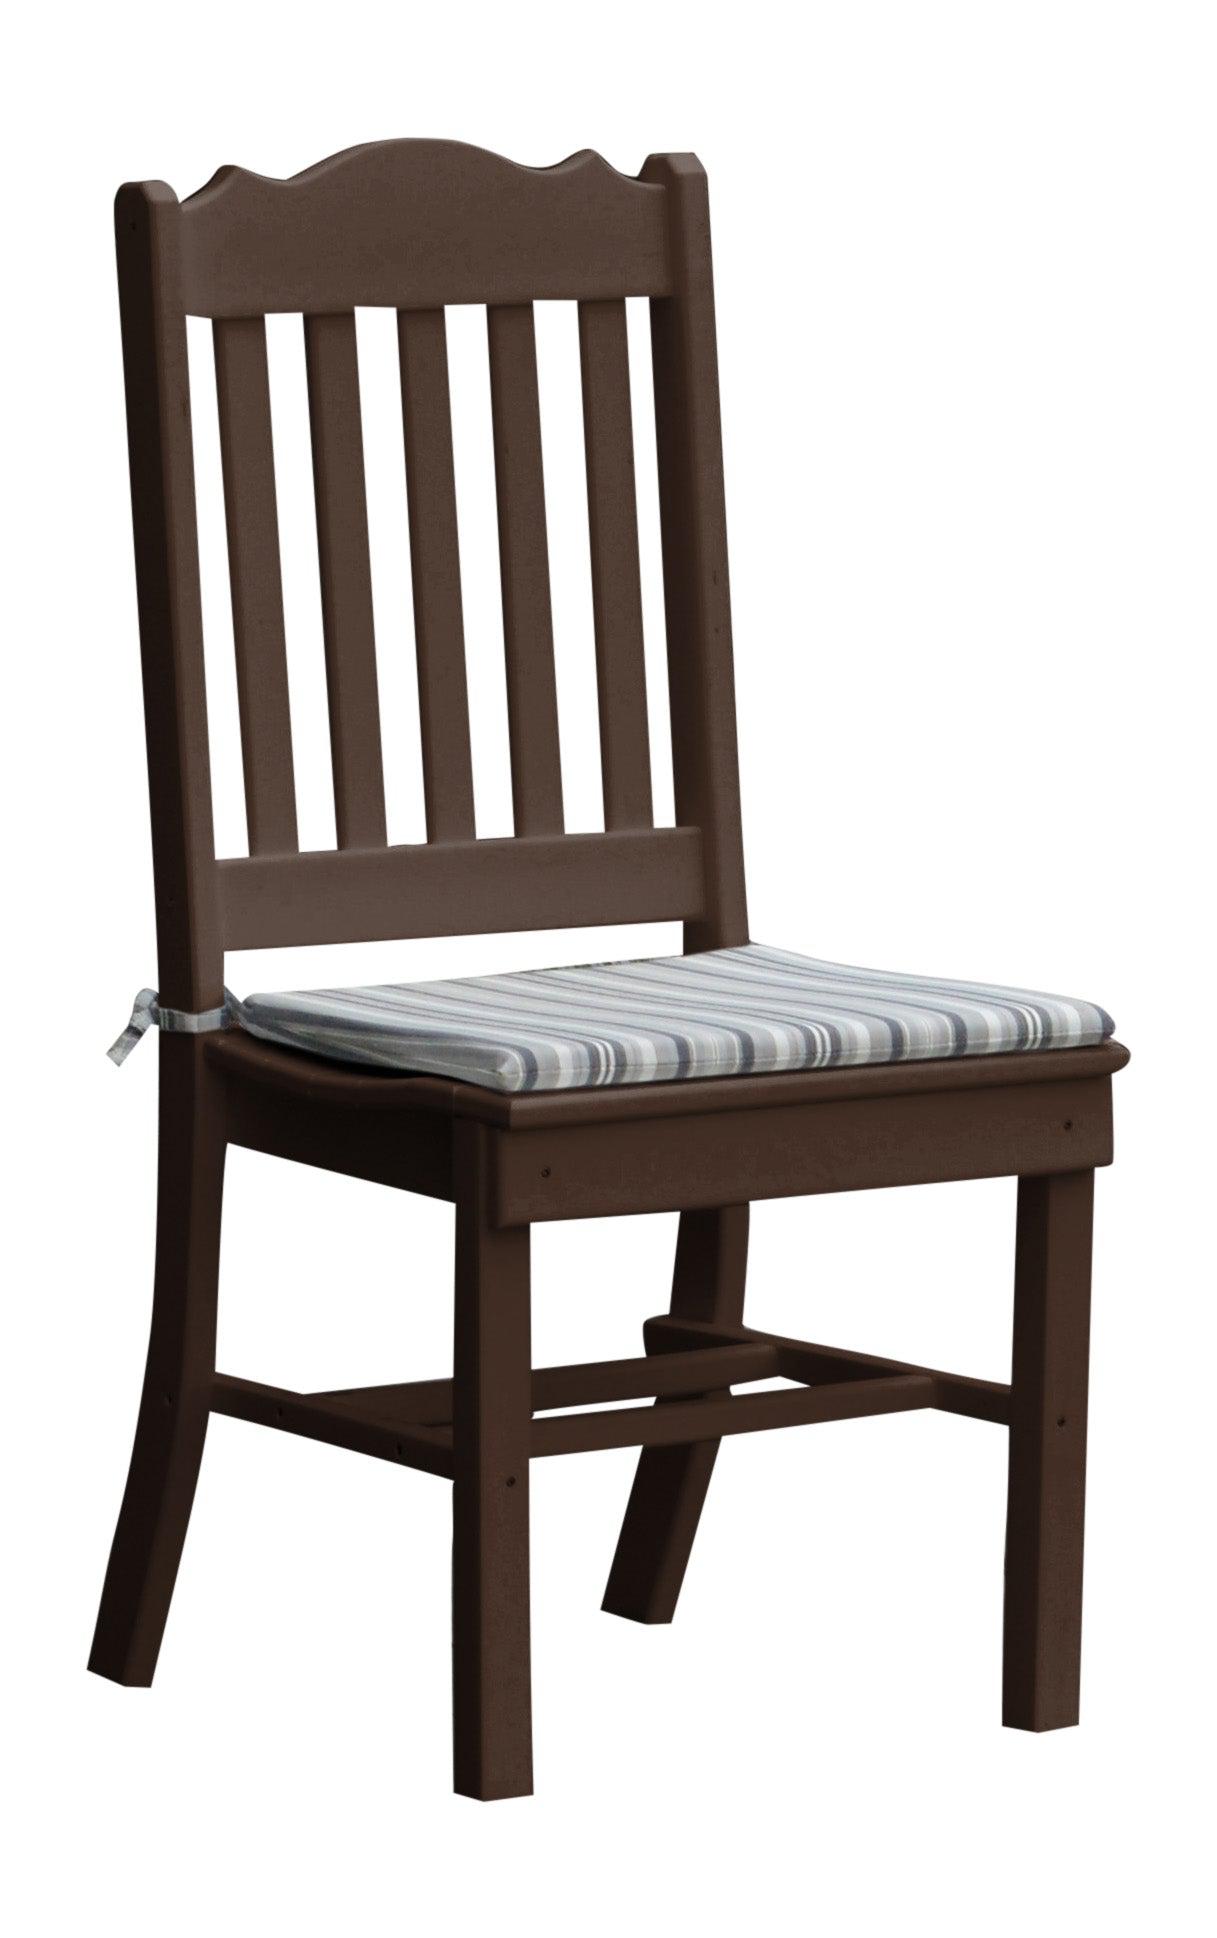 A&L Furniture Company Recycled Plastic Royal Dining Chair - Tudor rown